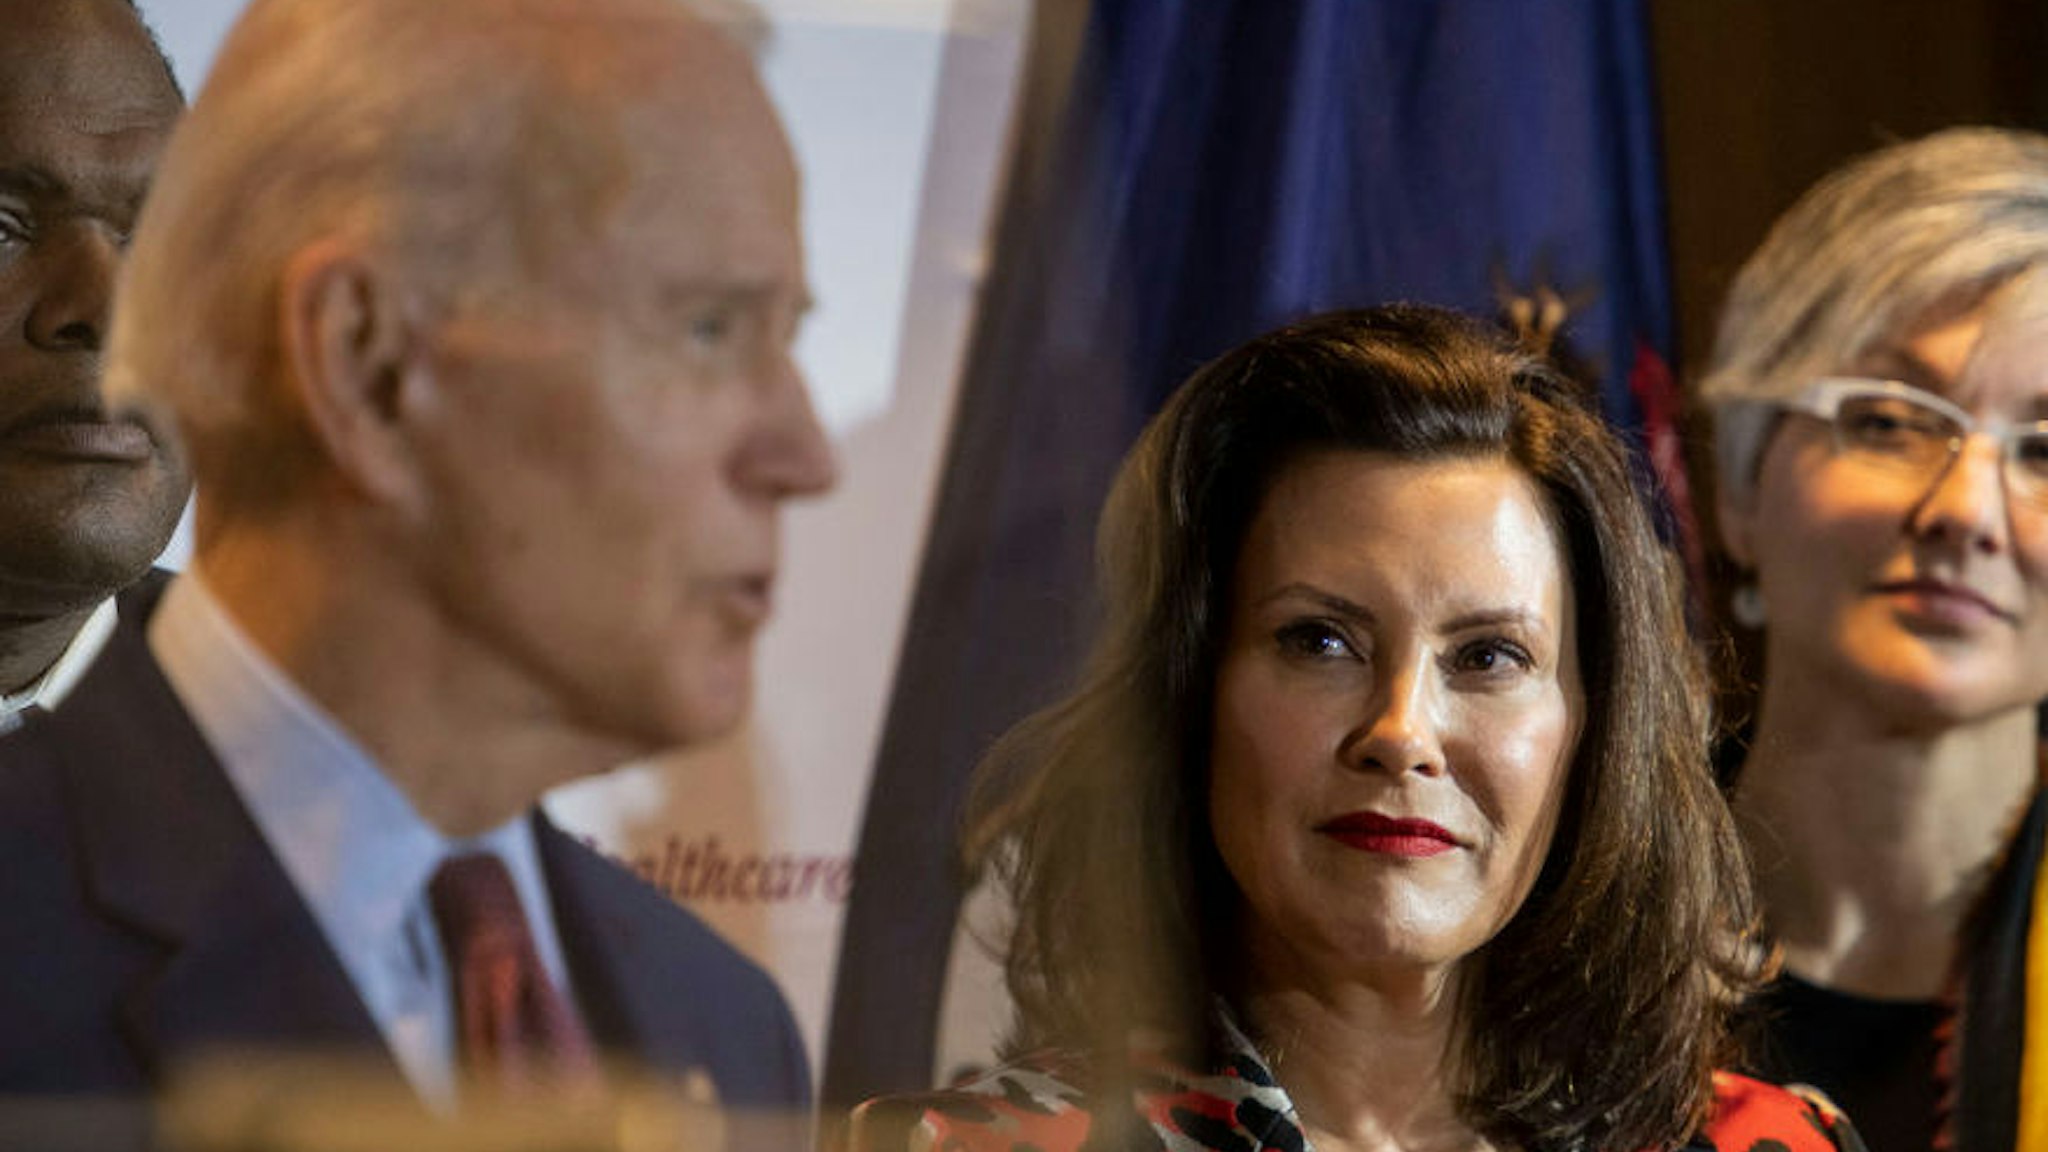 Former Vice President Joe Biden speaks as Michigan Governor Gretchen Whitmer looks on at an event at Cherry Health in Grand Rapids, MI on March 9, 2020. (Photo by Carolyn Van Houten/The Washington Post via Getty Images)